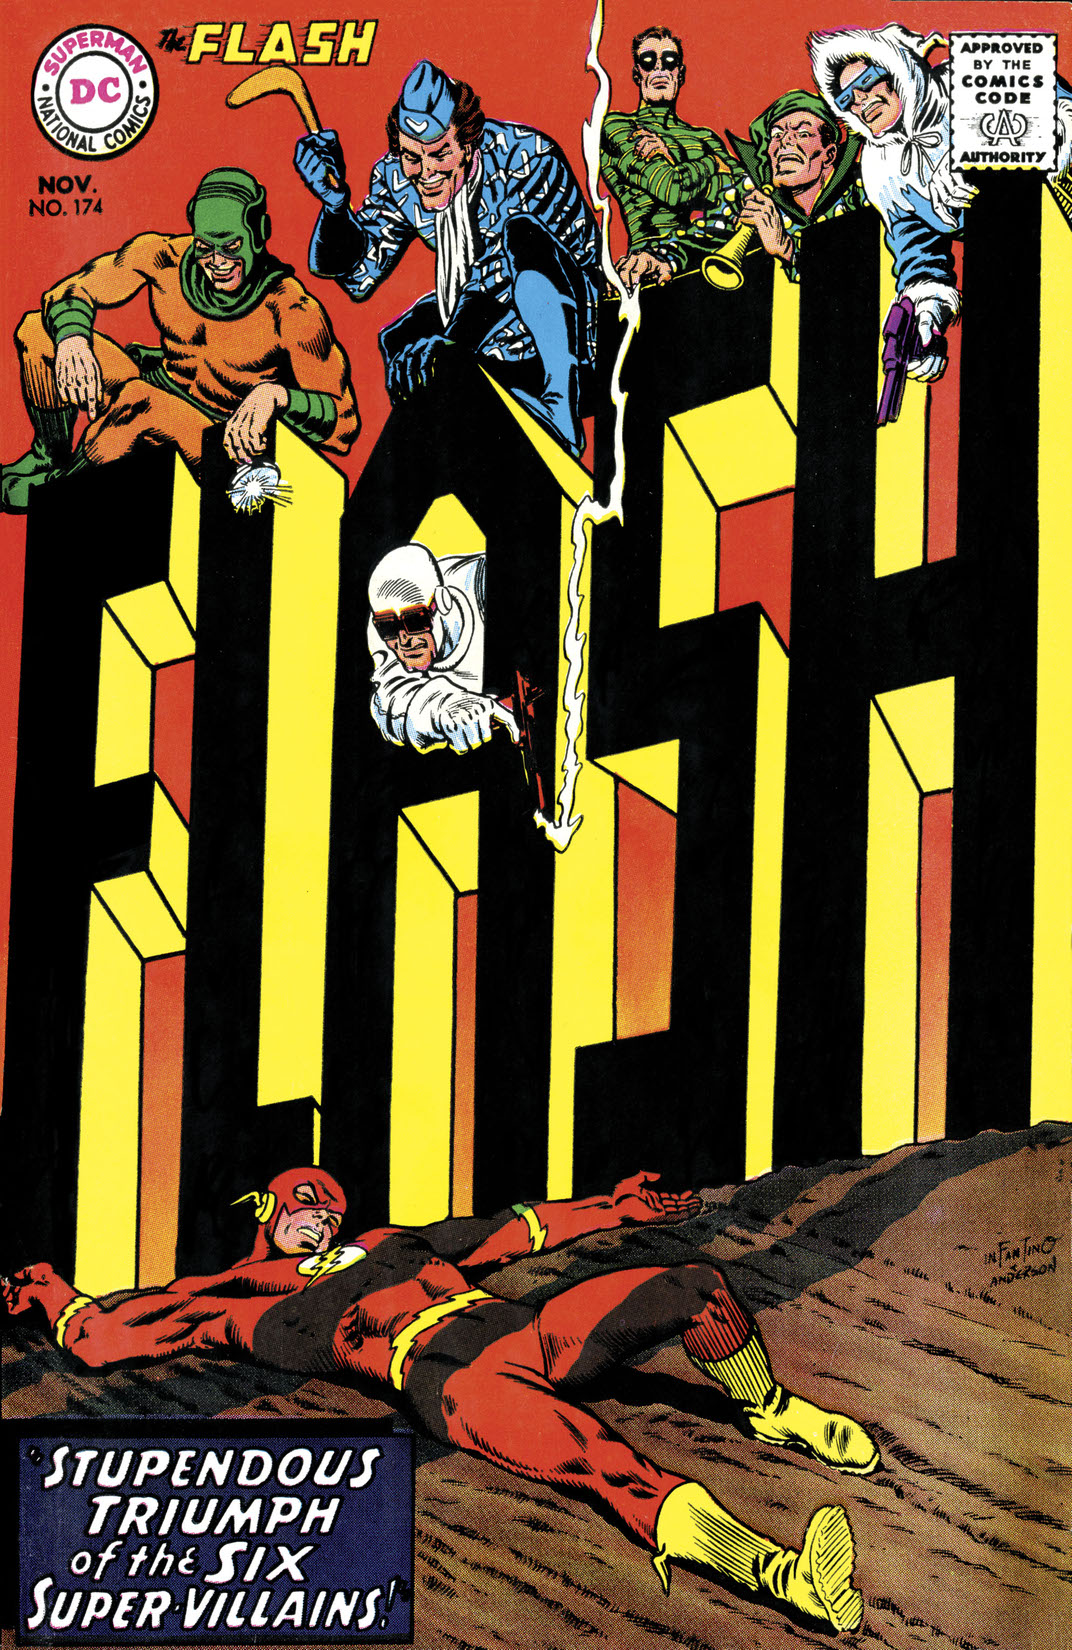 The Flash (1959-) #174 preview images